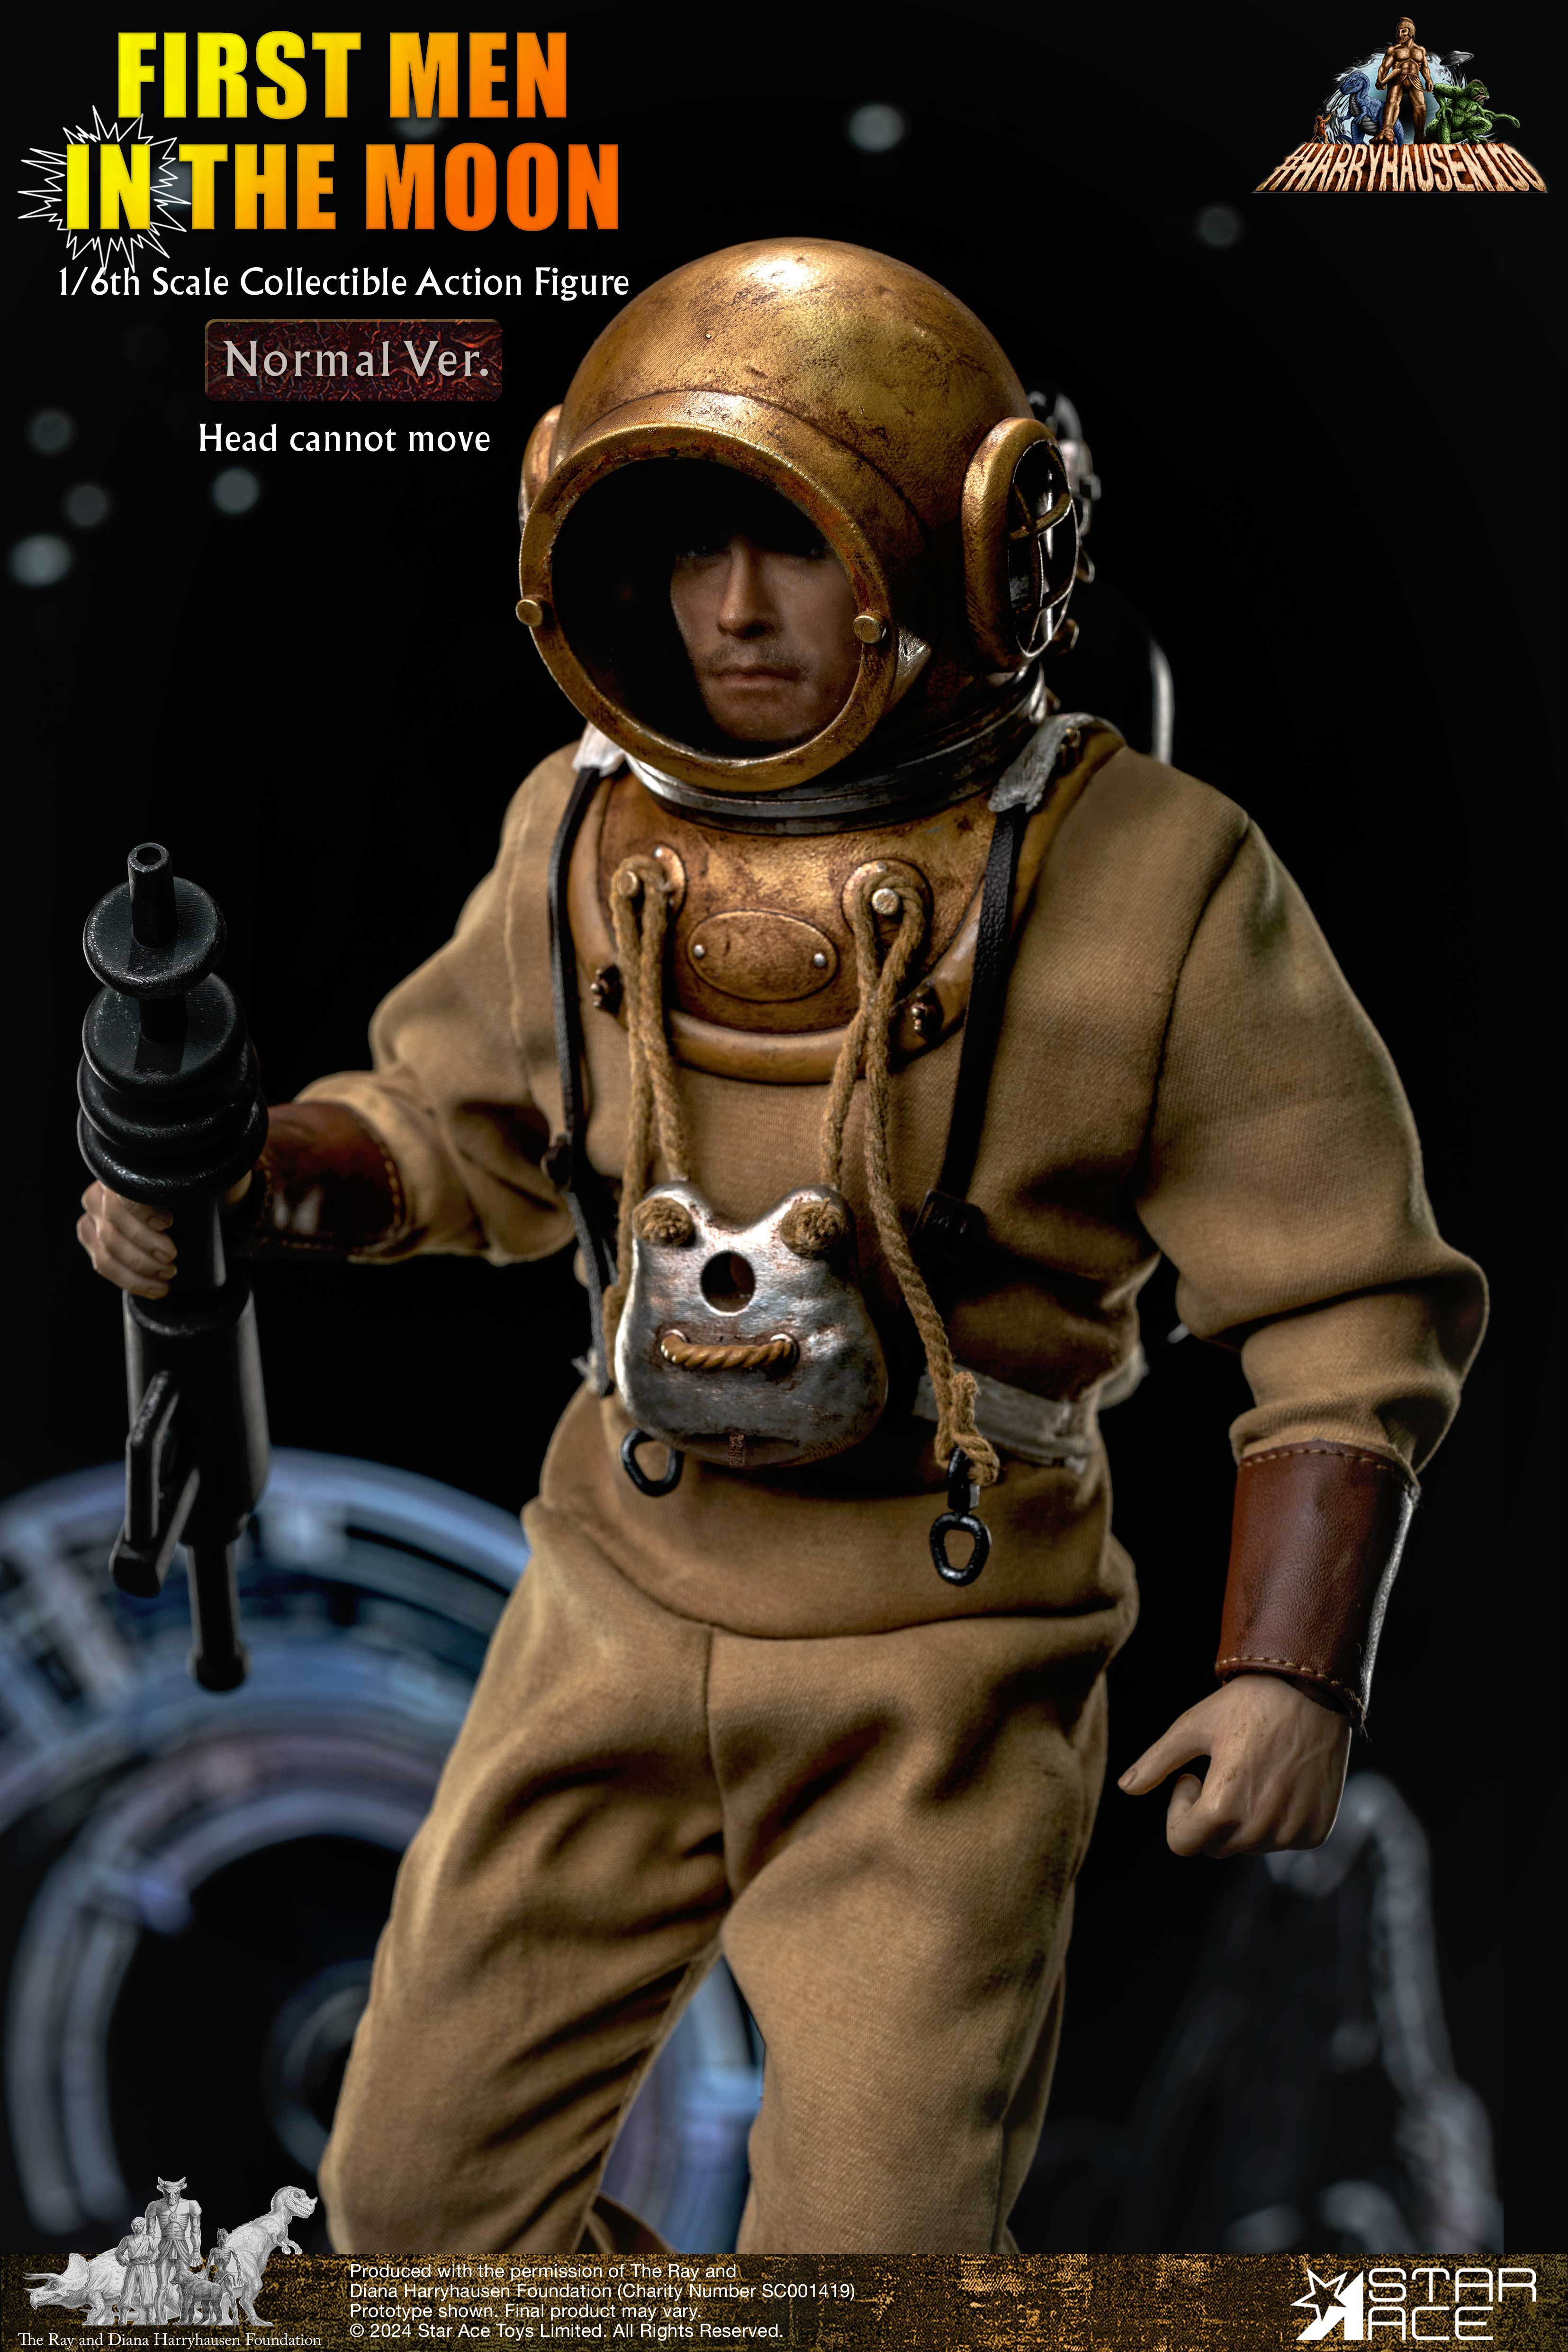 First Men in the Moon: Arnold Bedford: Normal Version: Sixth Scale: Star Ace